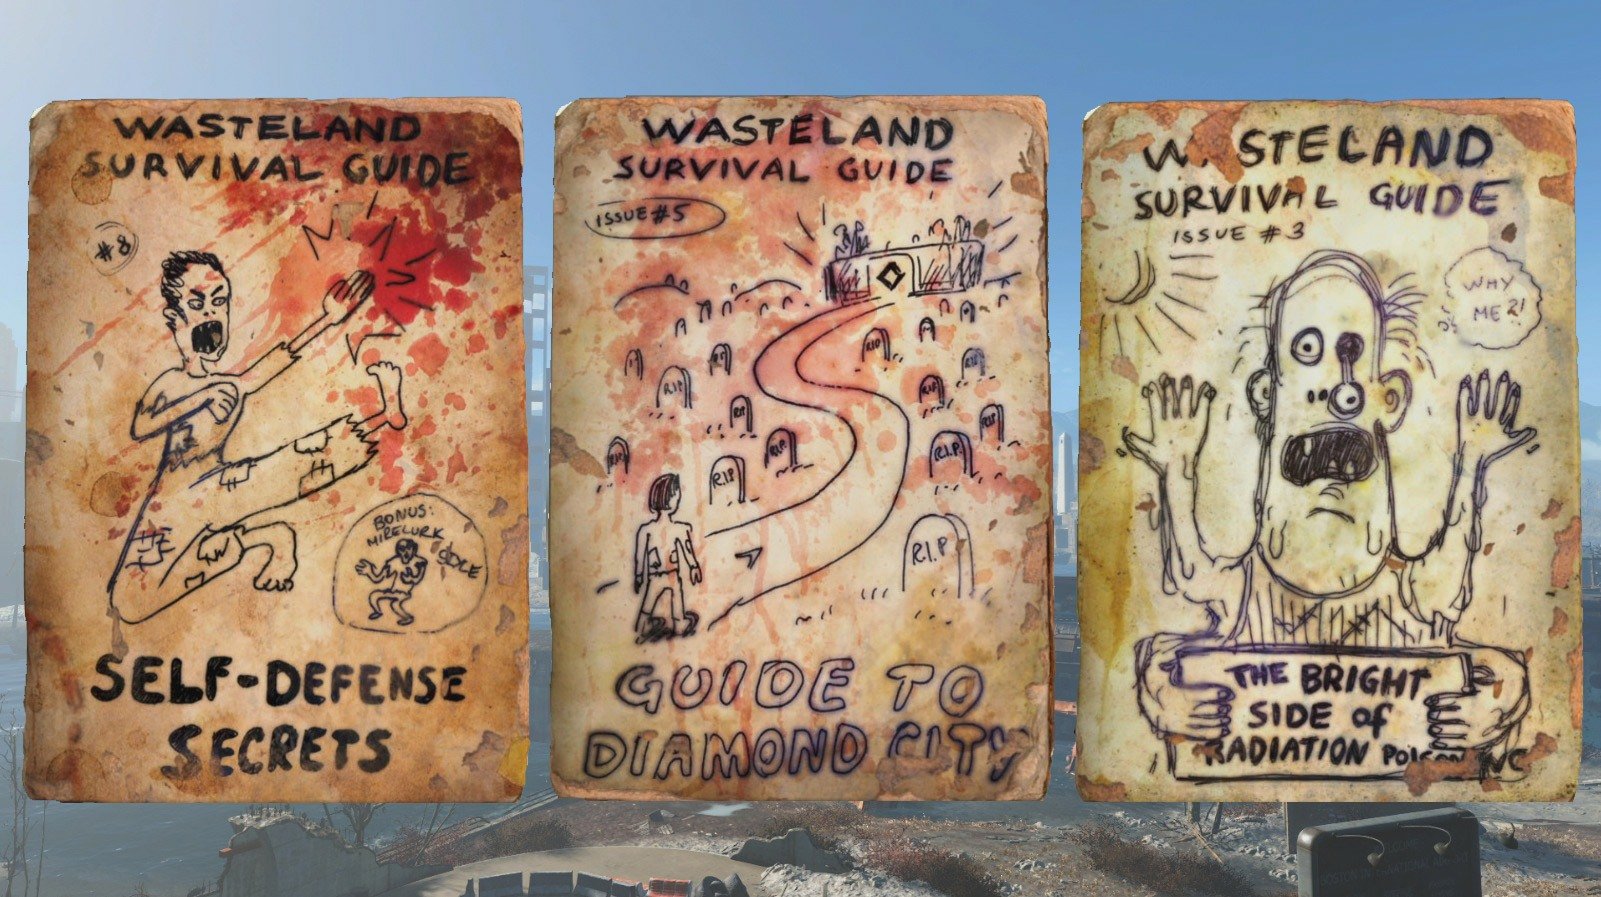 Fallout 4 Wasteland Survival Guide - Fallout 4 Comic Book and Magazine